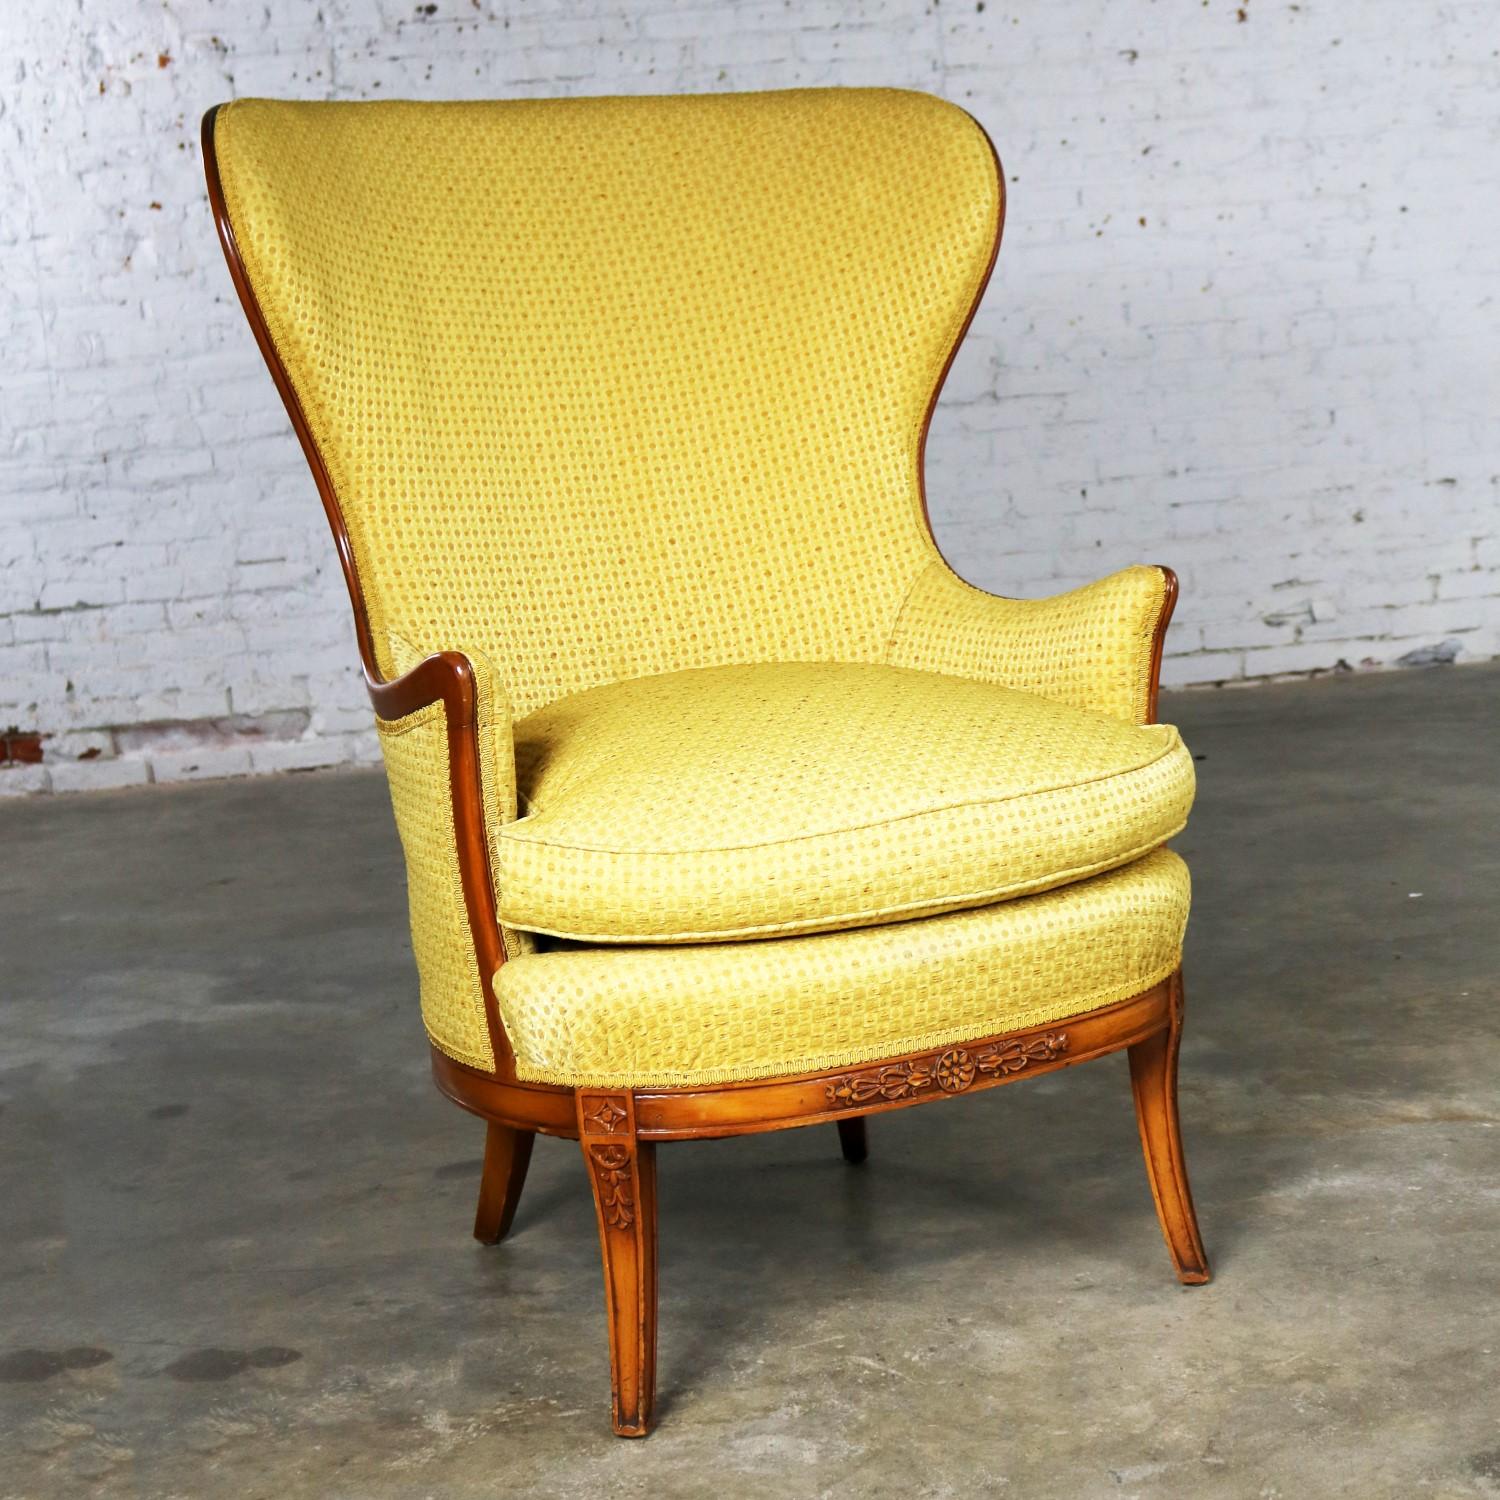 Handsome Art Deco style high wingback lounge chair with loads of detail. It retains its original tag from John M. Smyth Company in Chicago. And, its original beautiful upholstery which is still beautiful today. It is in wonderful vintage condition